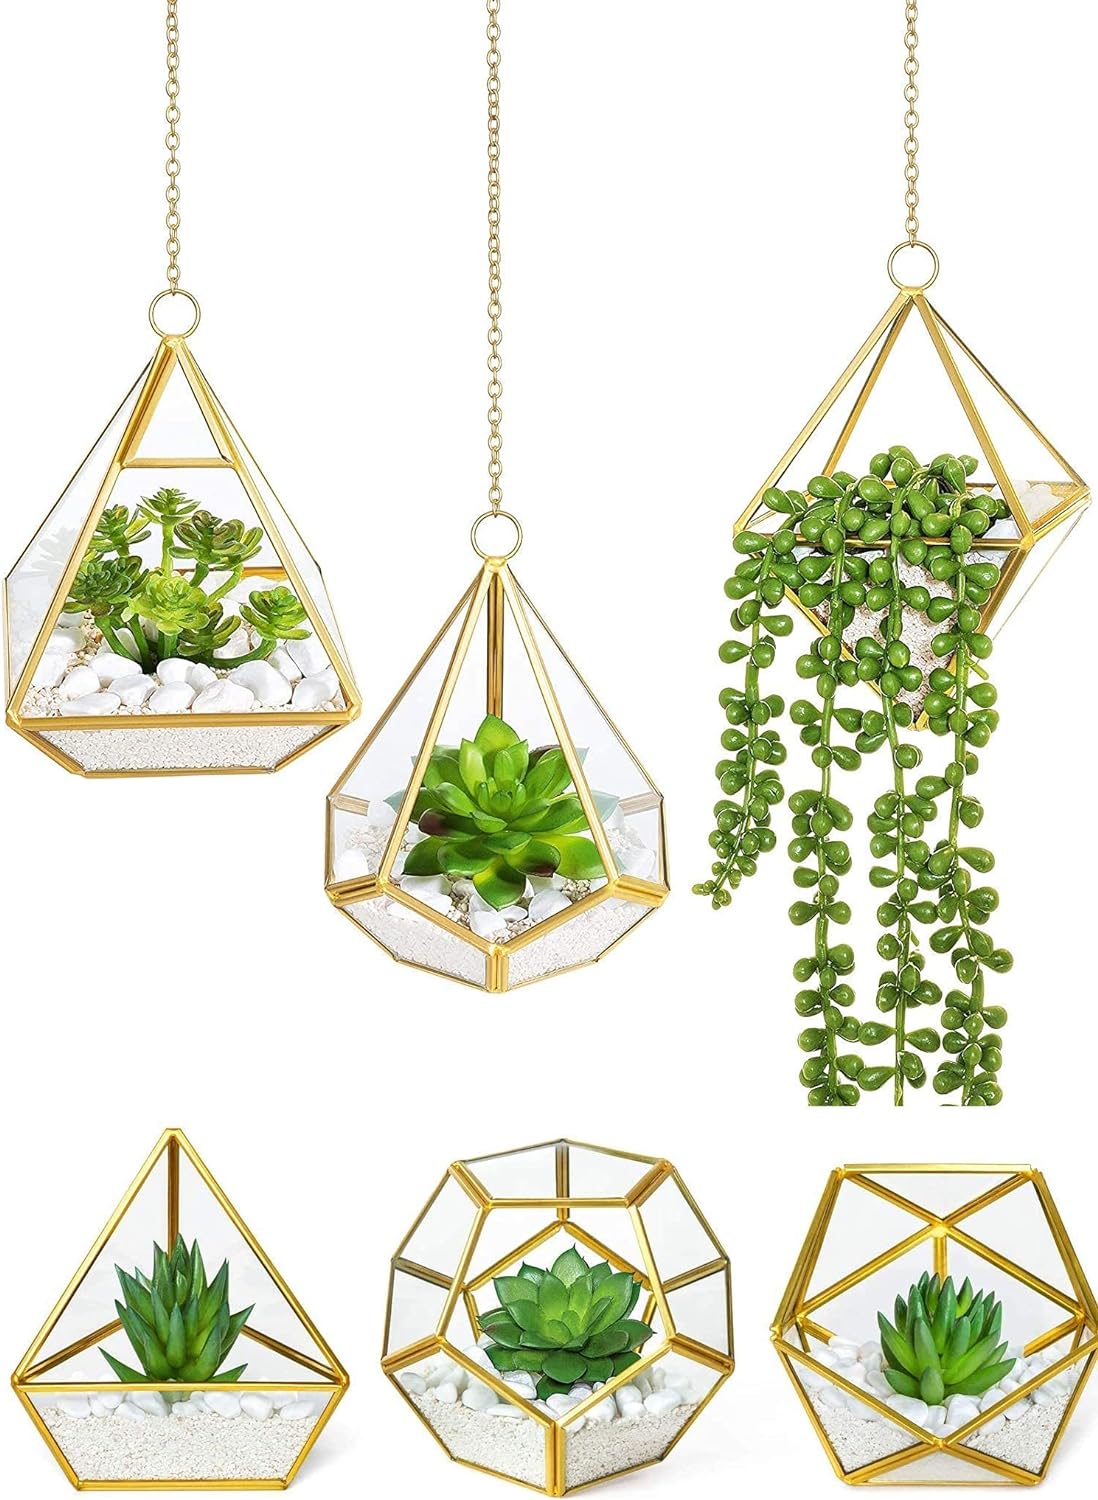 Mkono Office Decor for Desk, 3 Pack Mini Tabletop Glass Geometric Terrarium and 3 Pack Hanging Glass Plant Terrarium with Artificial Plants Miniature Potted Boho Room Decor for Dorm Wedding Gift Idea